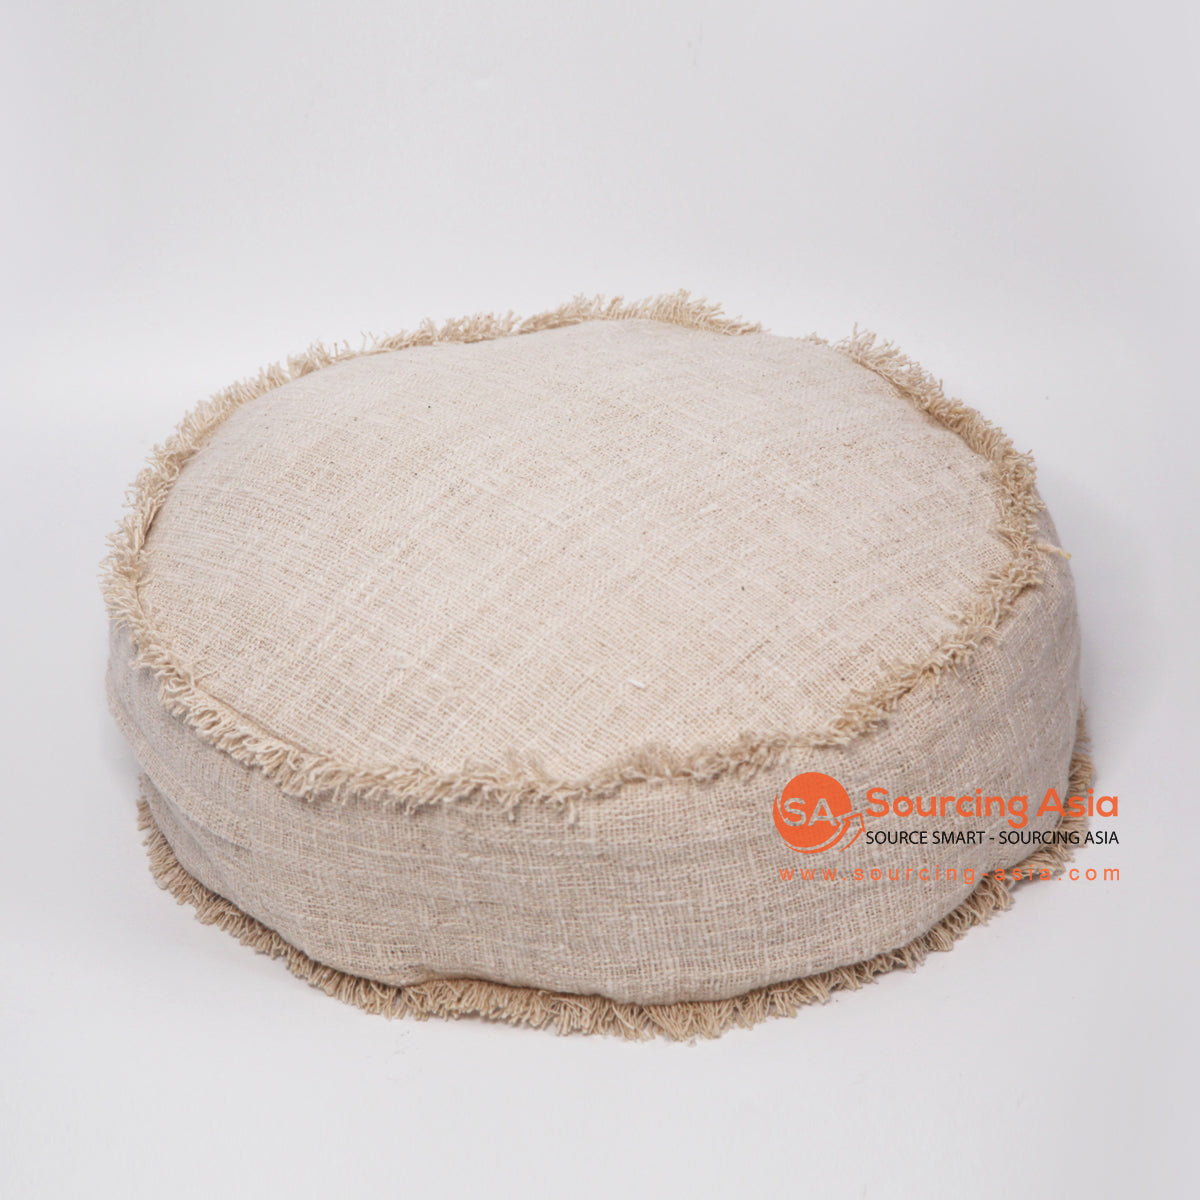 MAC049 NATURAL RAW COTTON ROUND POUFFE WITH FRINGE